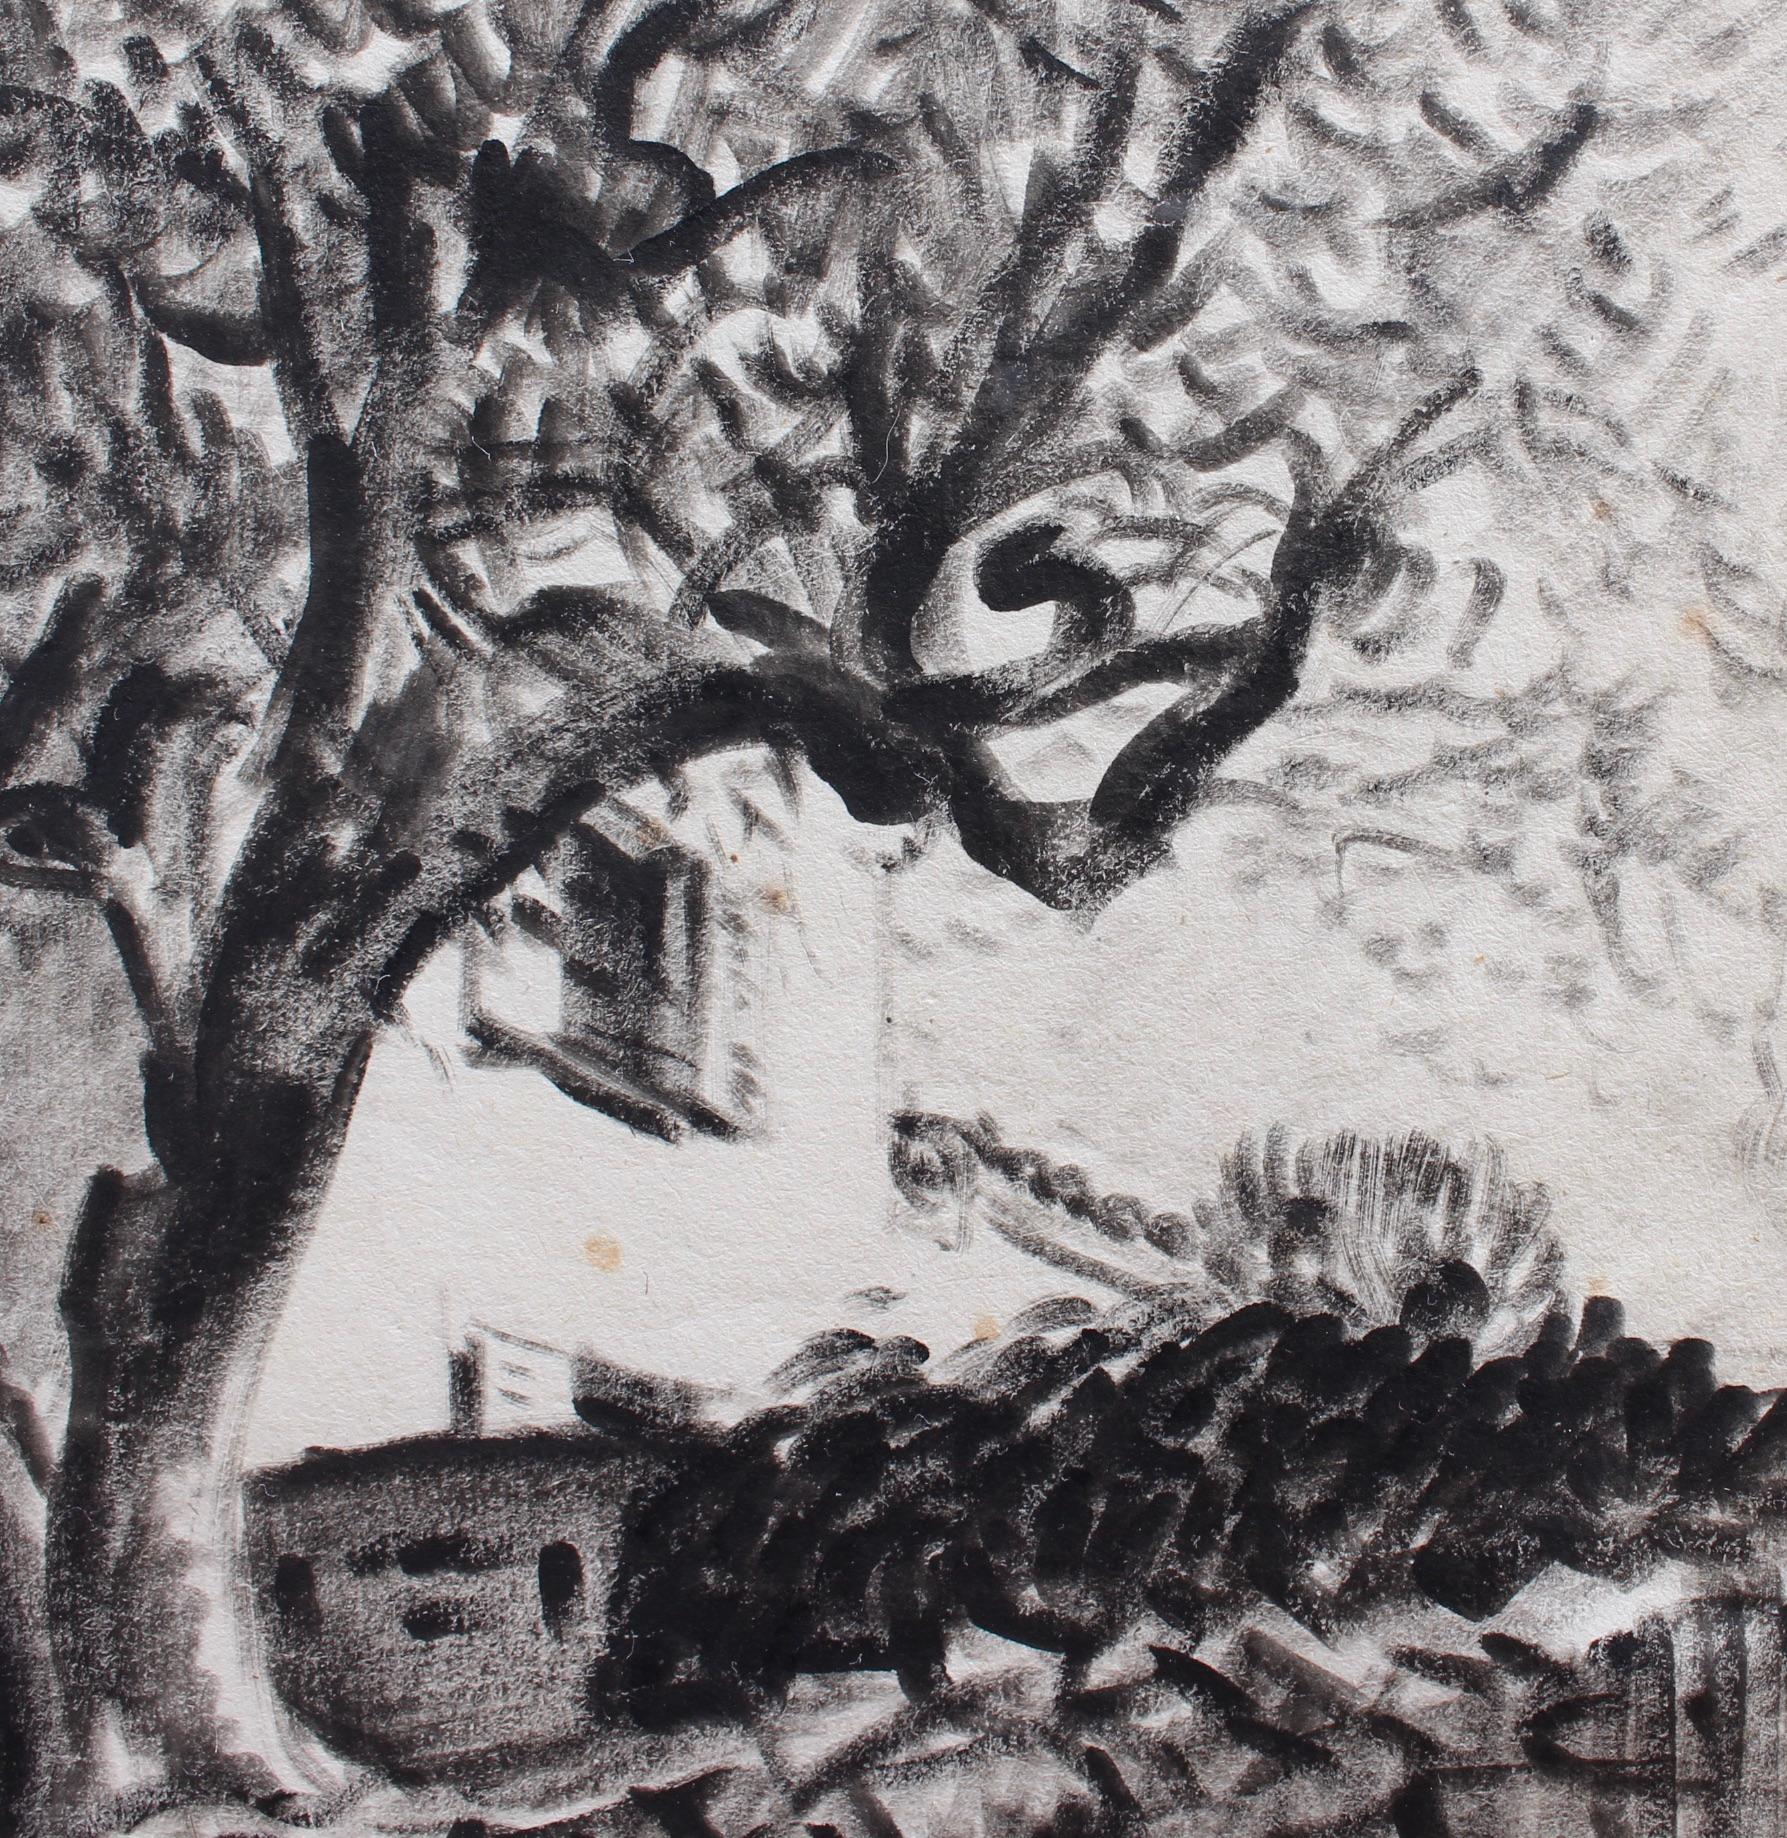 'The Olive Tree Behind the Stone Wall', ink on art paper, by Pierre Dionisi (circa 1930s). Sepia-toned, original drawing in a compelling style depicts a charming scene with a line of olive trees fronting a traditional Provençal home. Provence,